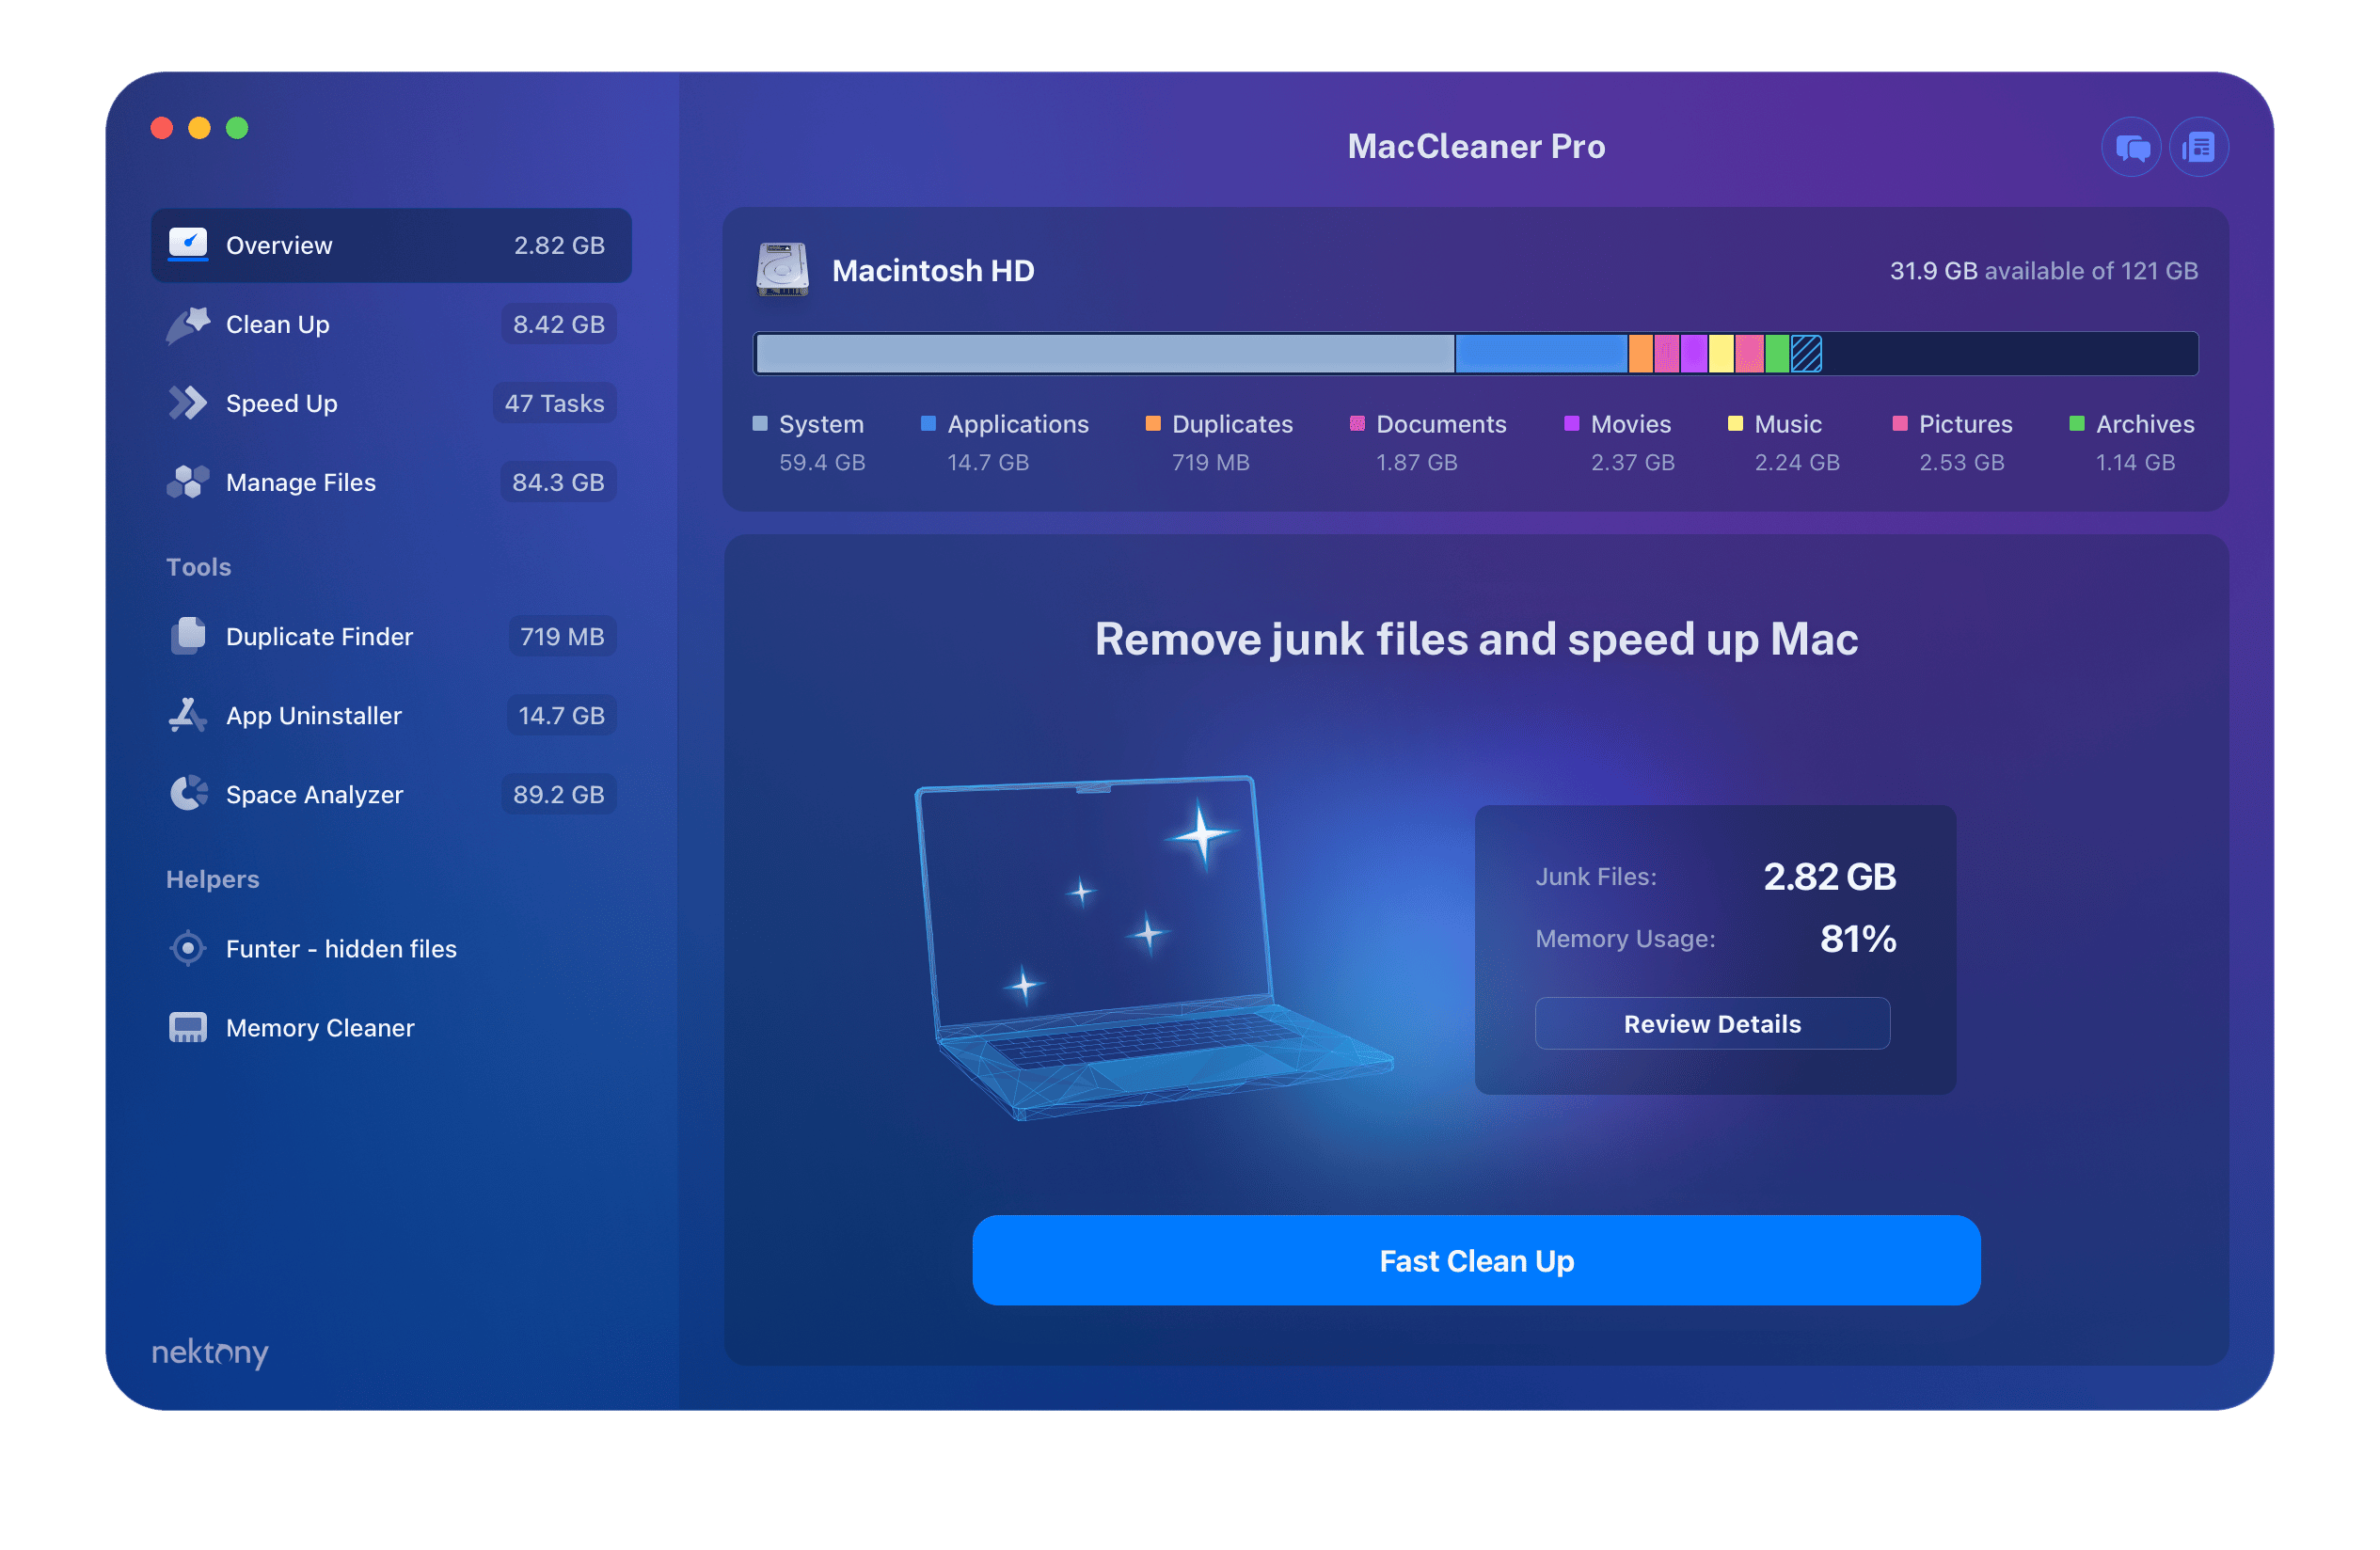 MacCleaner Pro showing Overview window